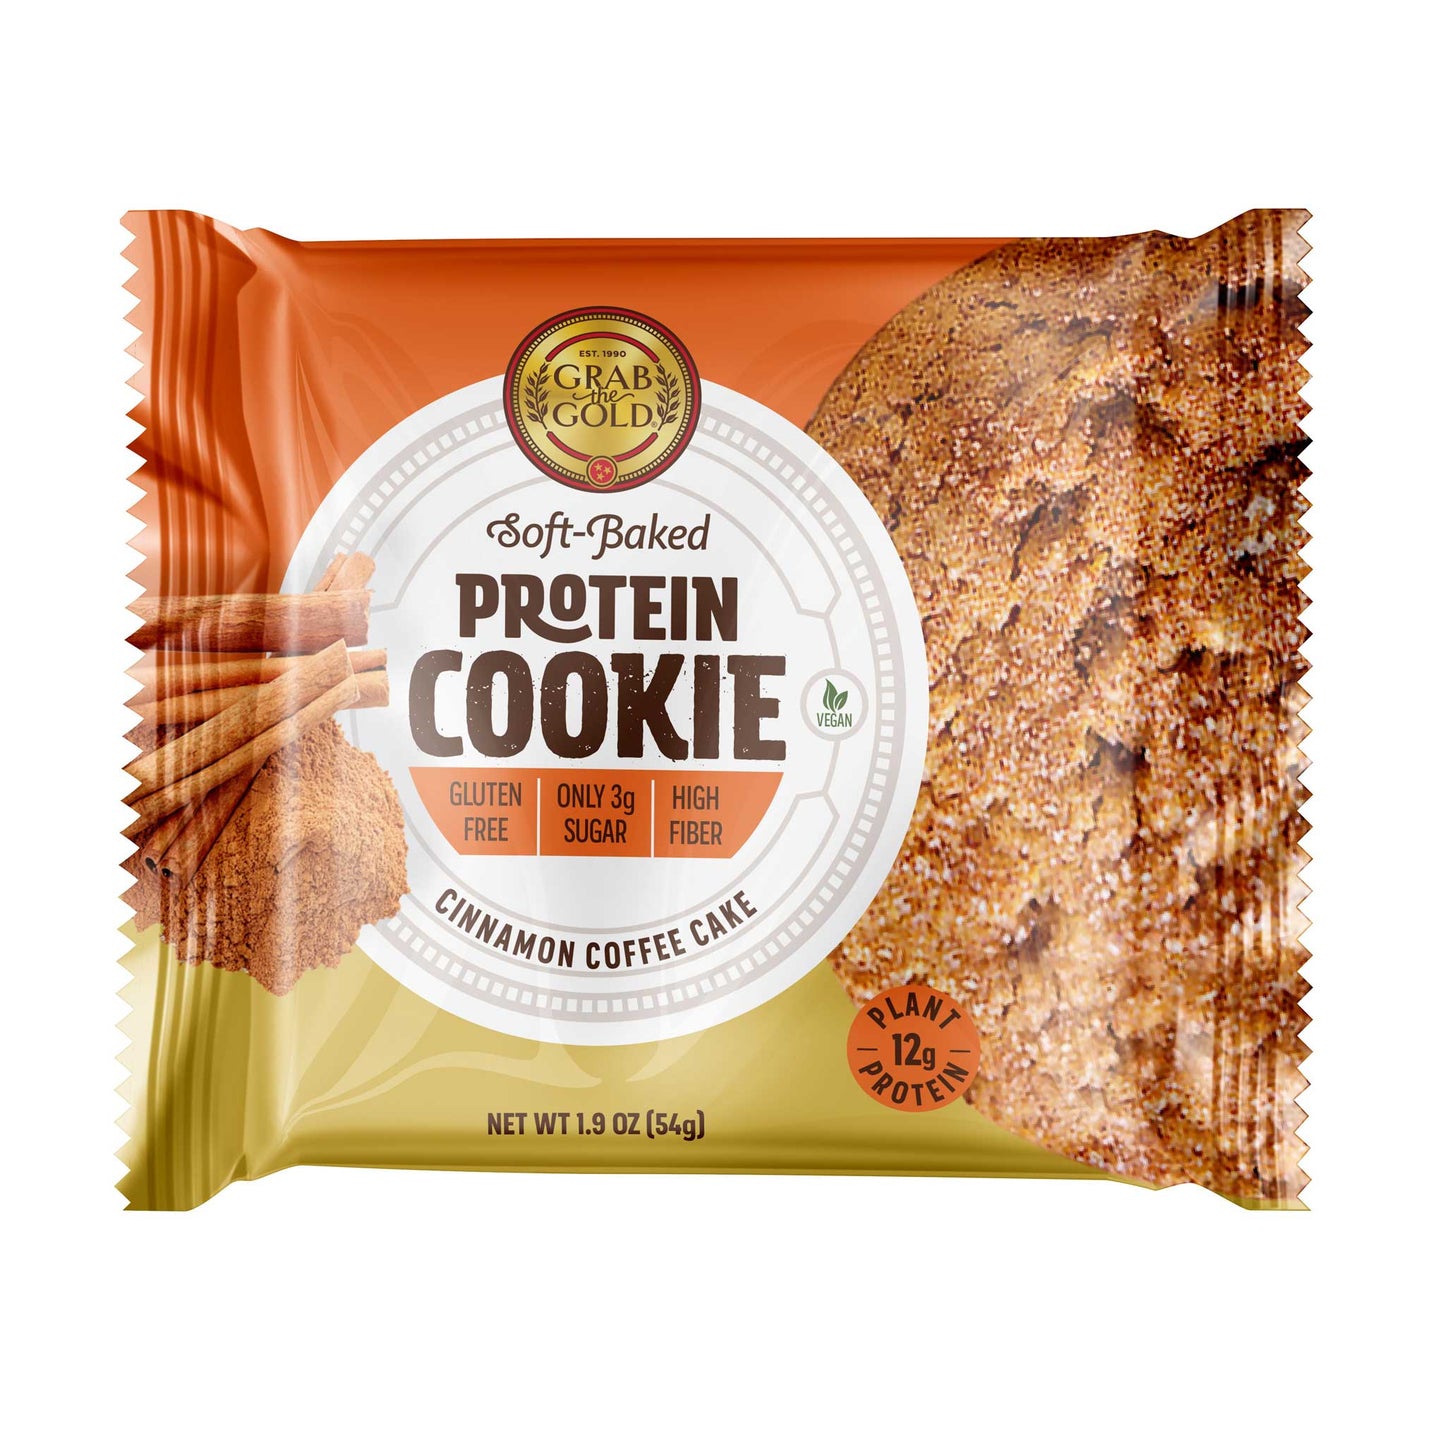 New & Improved Protein Cookies Coming Soon!